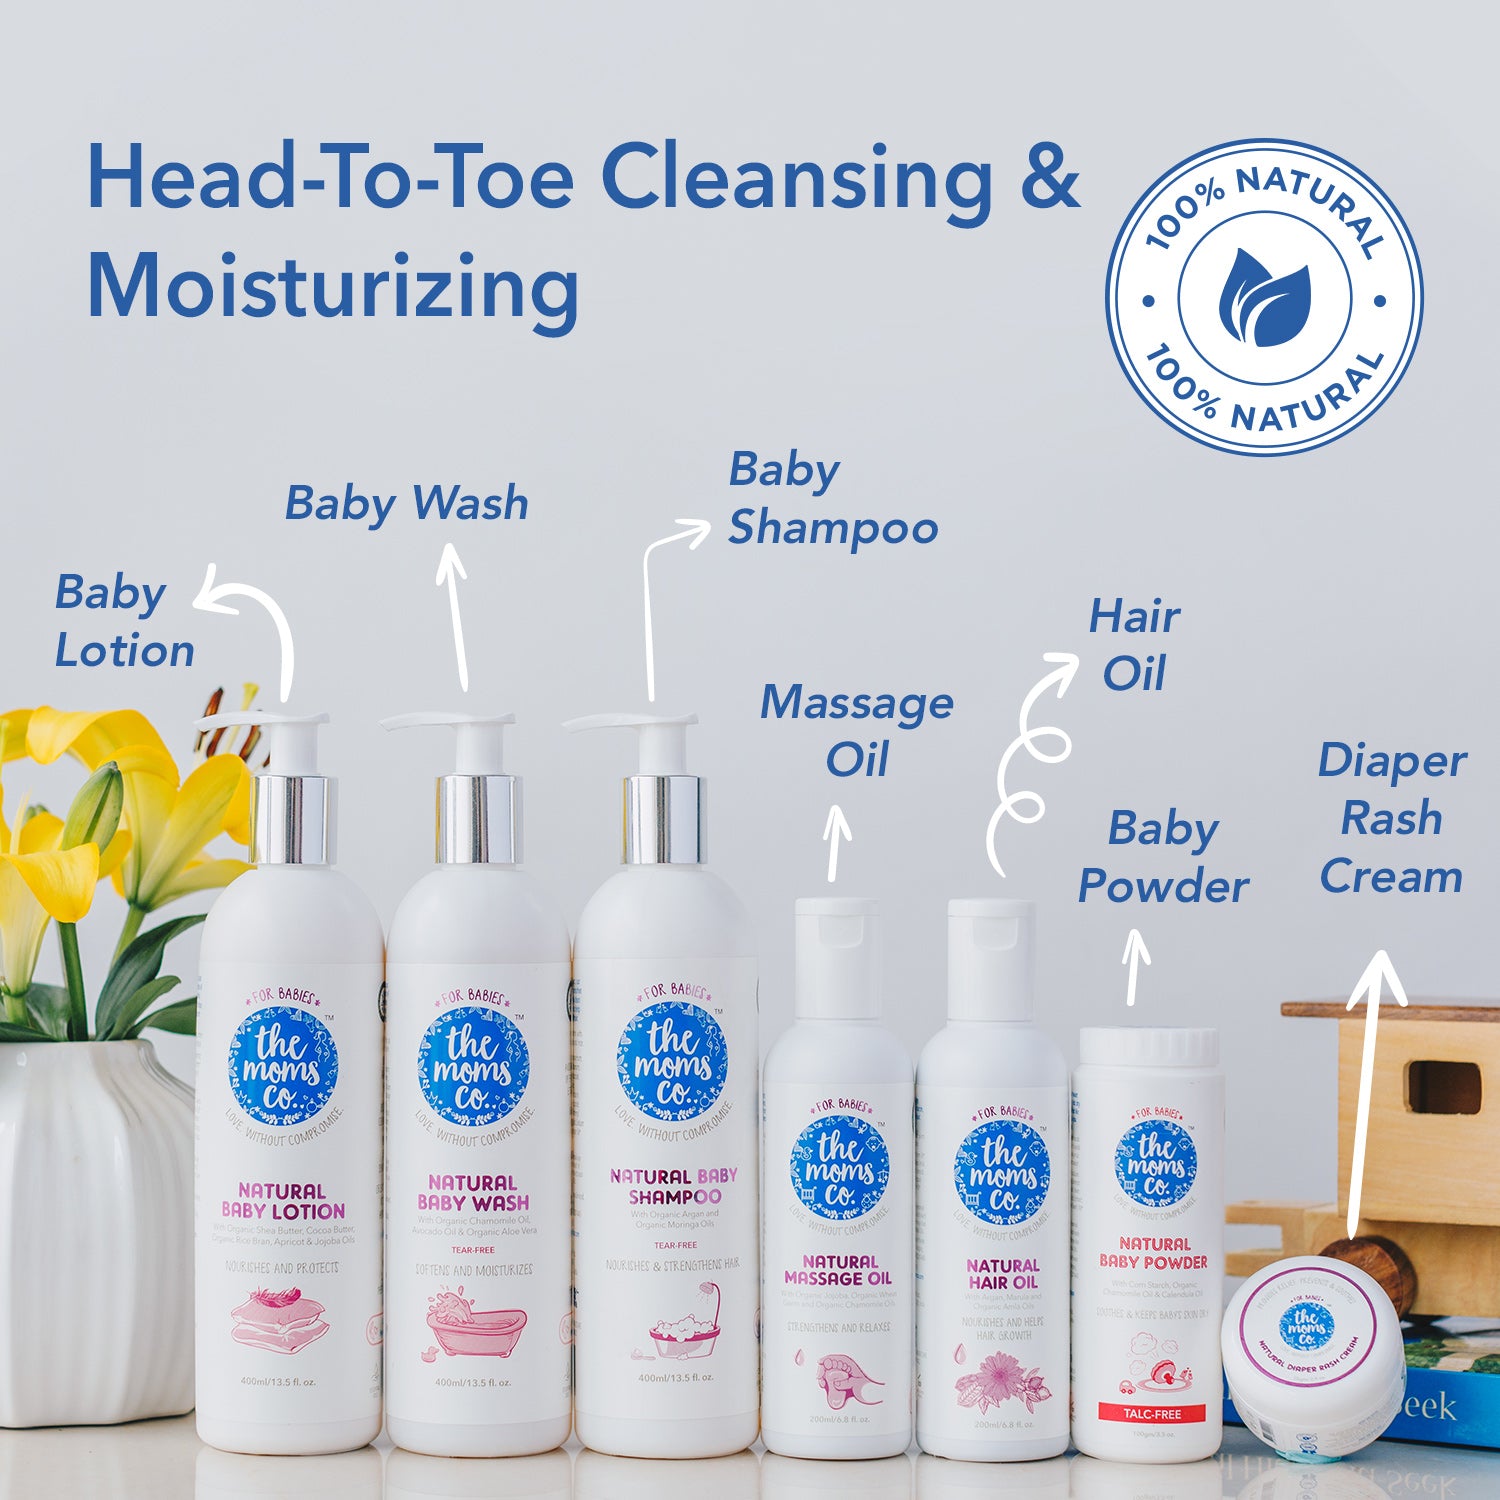 The Moms Co. Natural Baby Lotion | Australia-Certified | With Organic Apricot, Organic Jojoba and Organic Rice Bran Oils